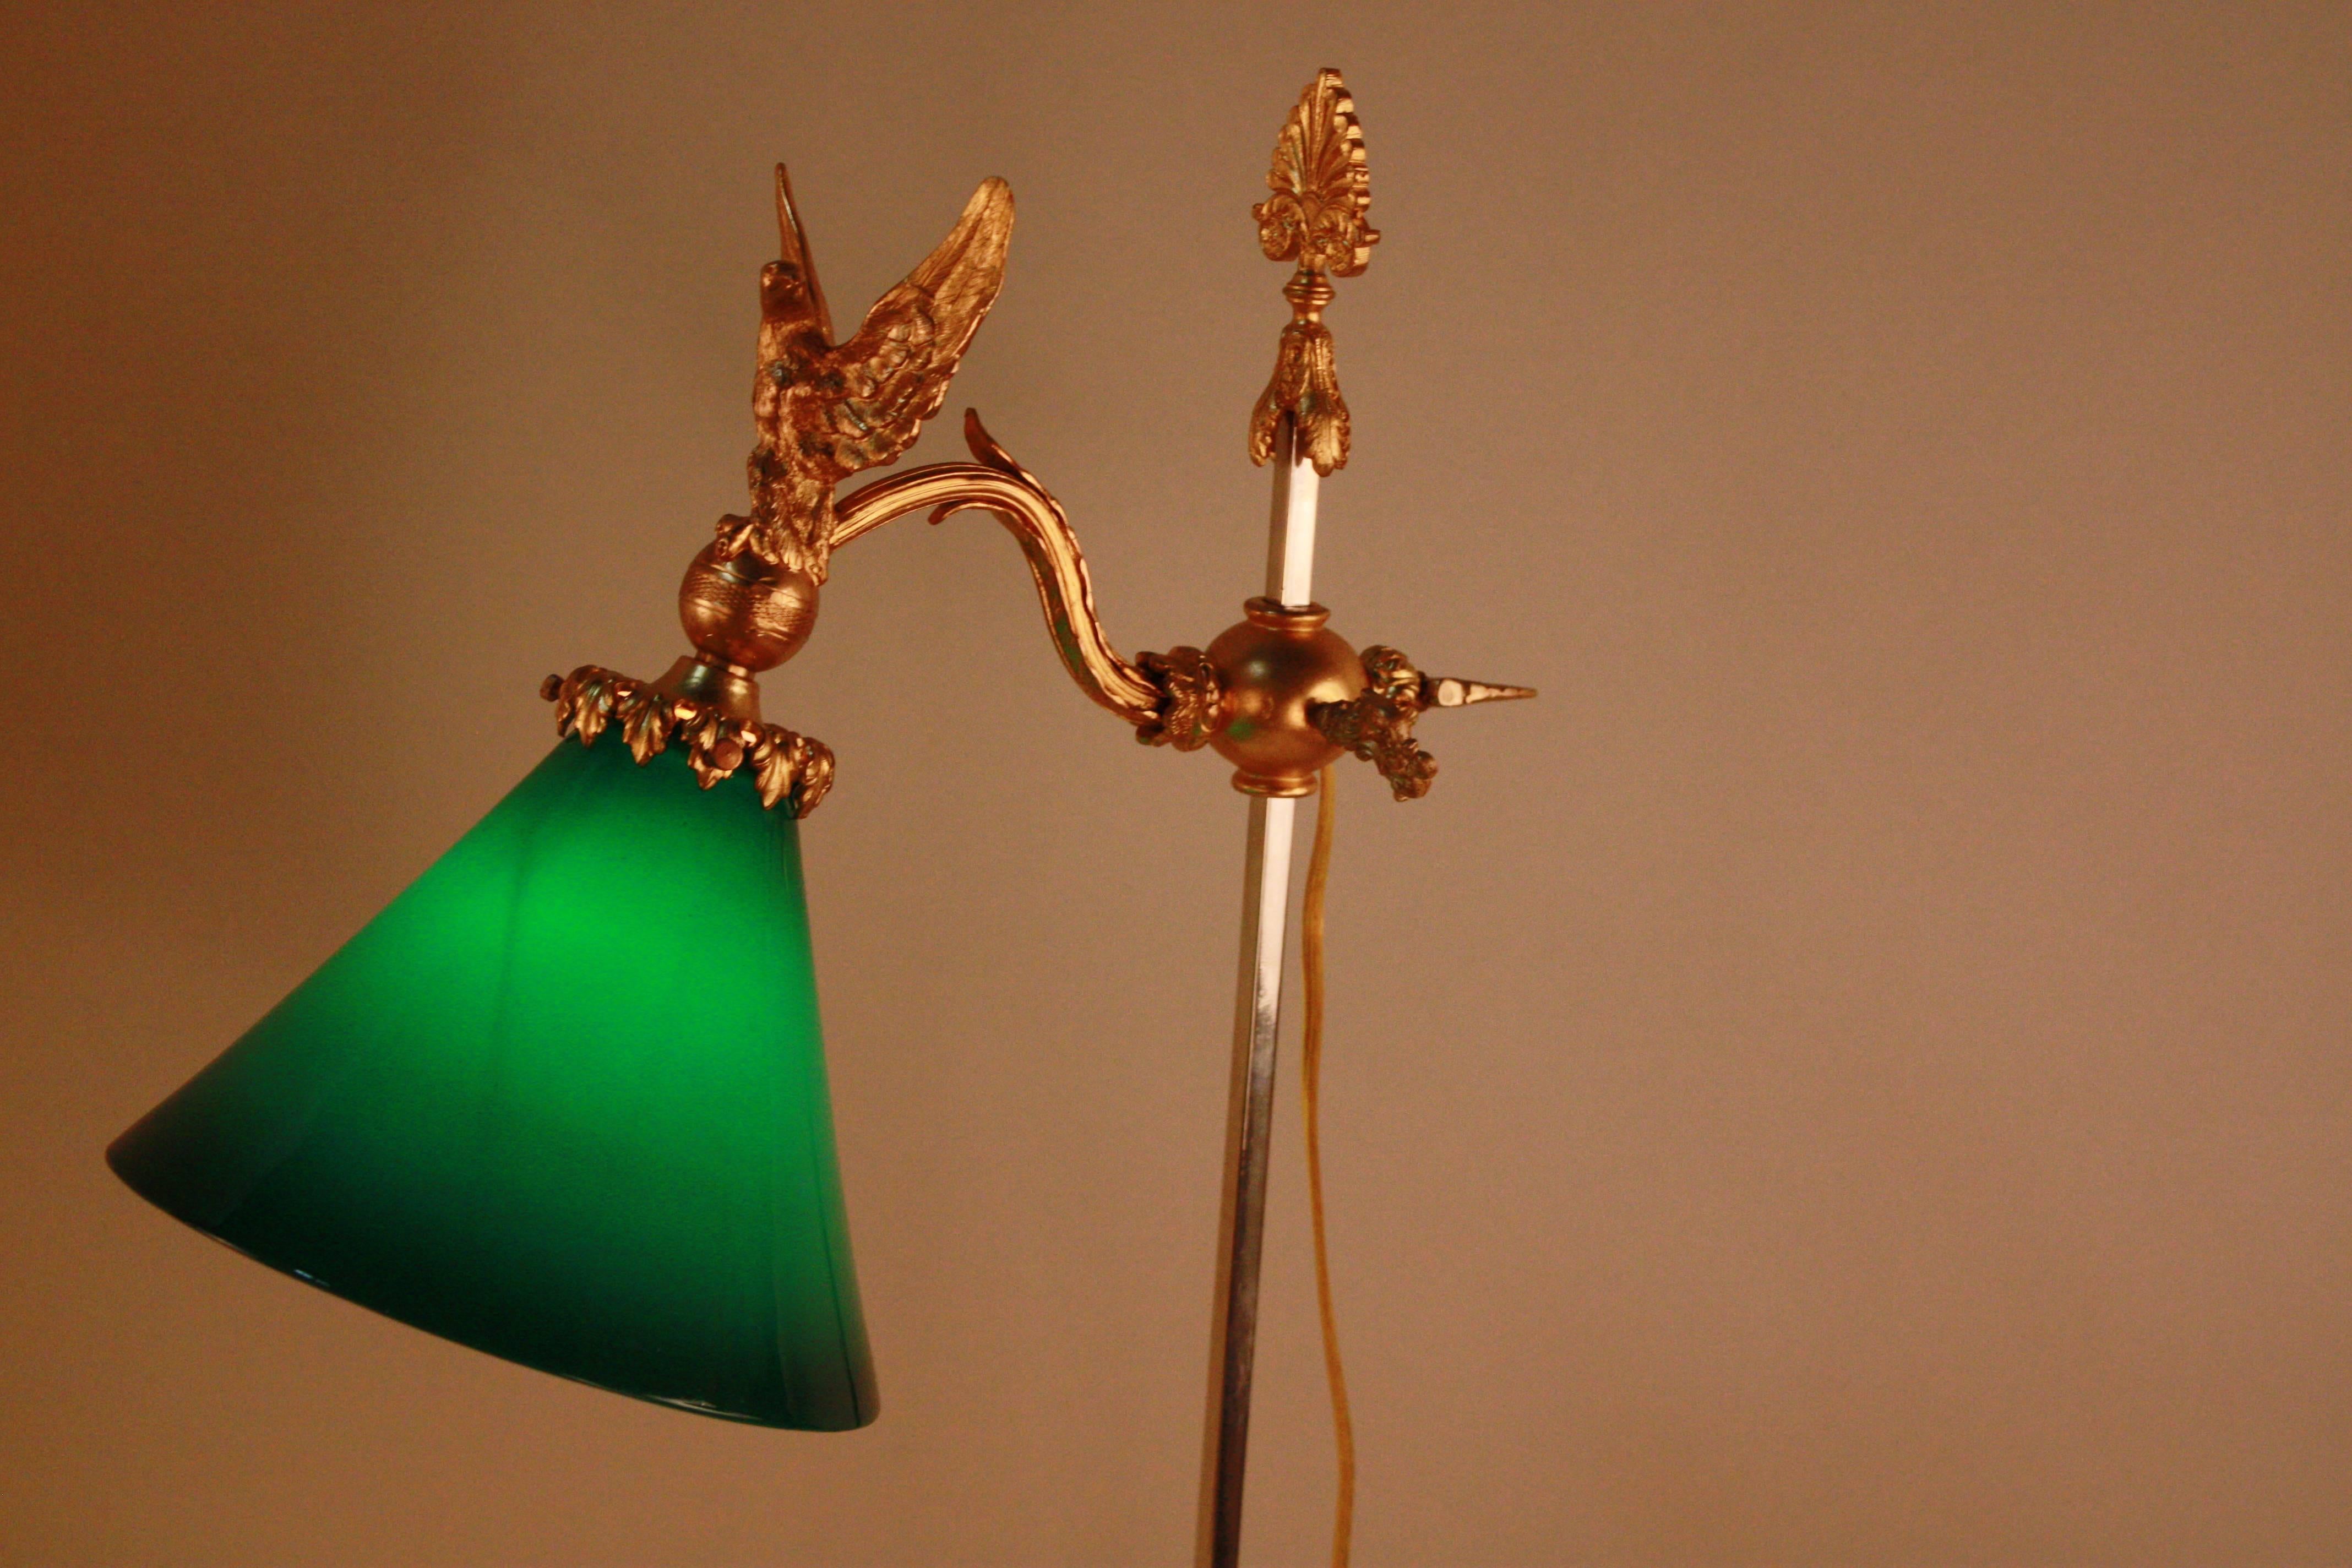 A wonderful golden bronze adjustable lamp, depicting a soaring eagle holding a case glass green shade. Provides the perfect pop of color for a study or lounge. 